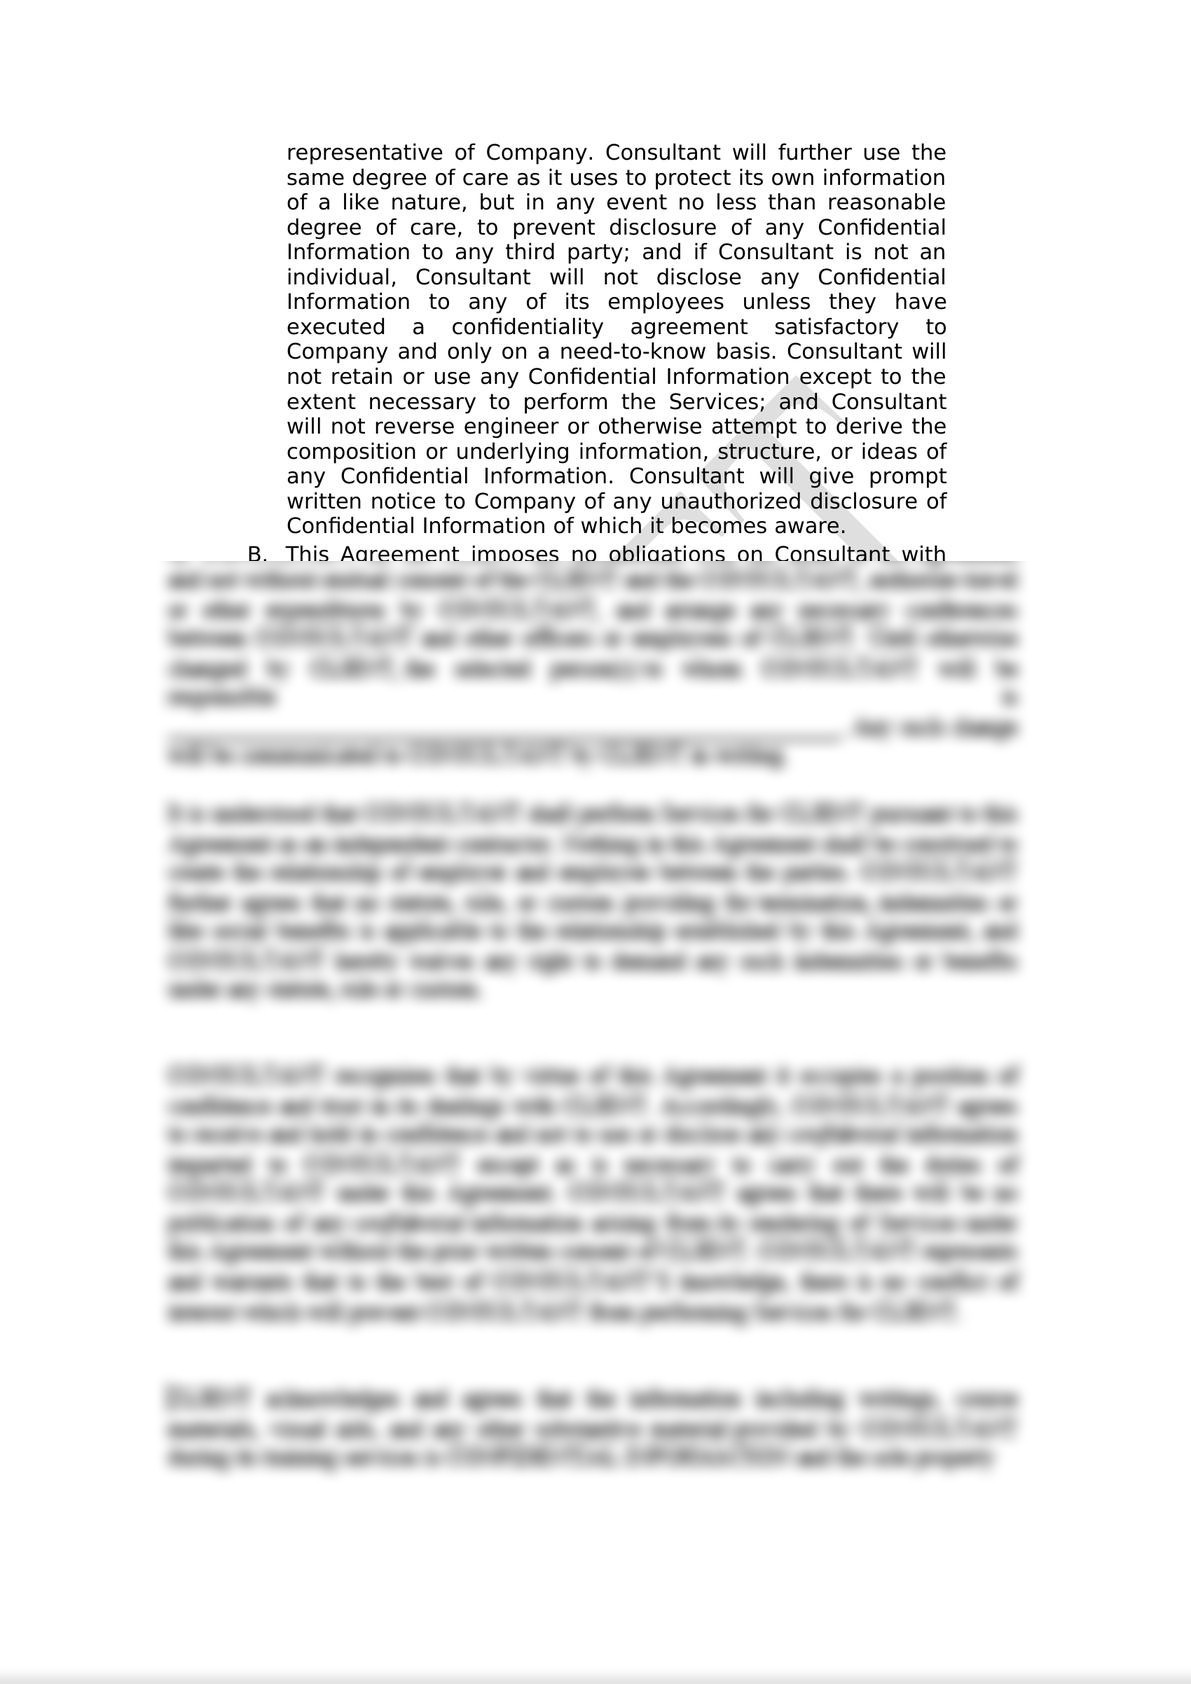 Consulting Agreement (IP Context)-3